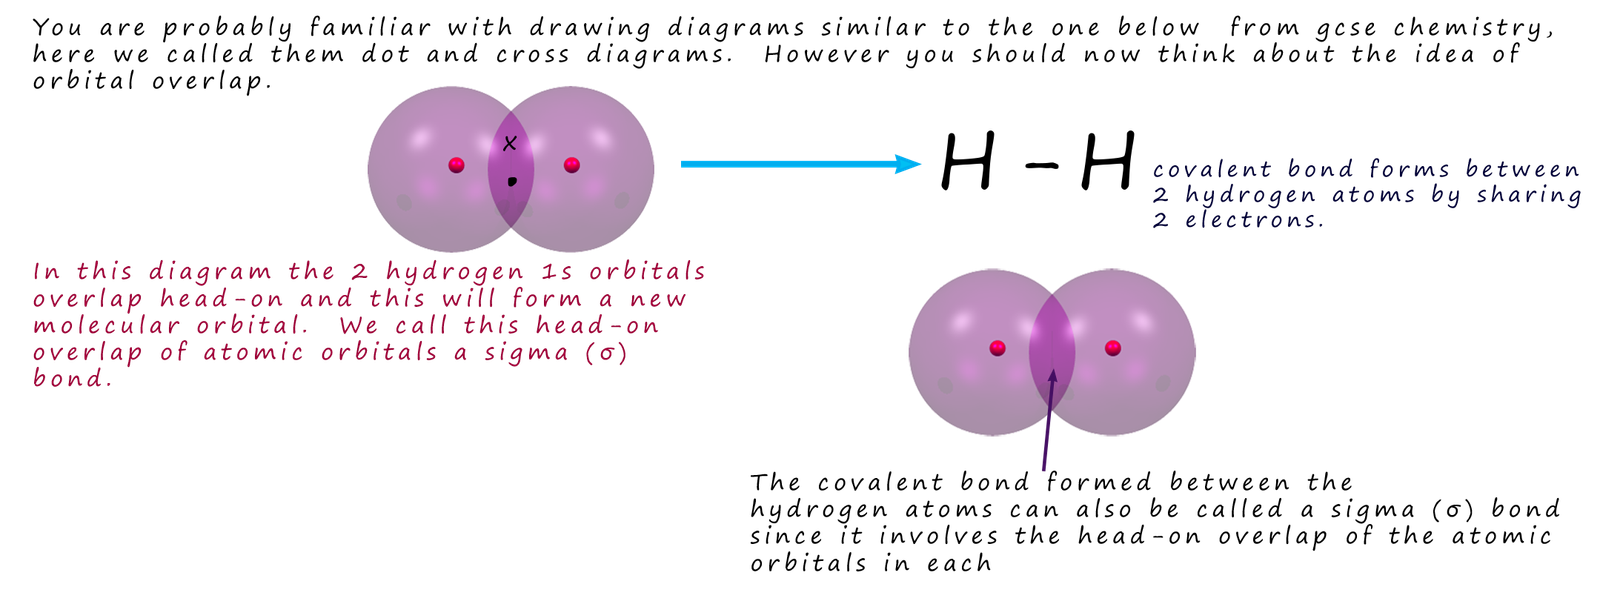 The overlap of atomic orbitals on hydroegn atoms to form a molecular orbital.